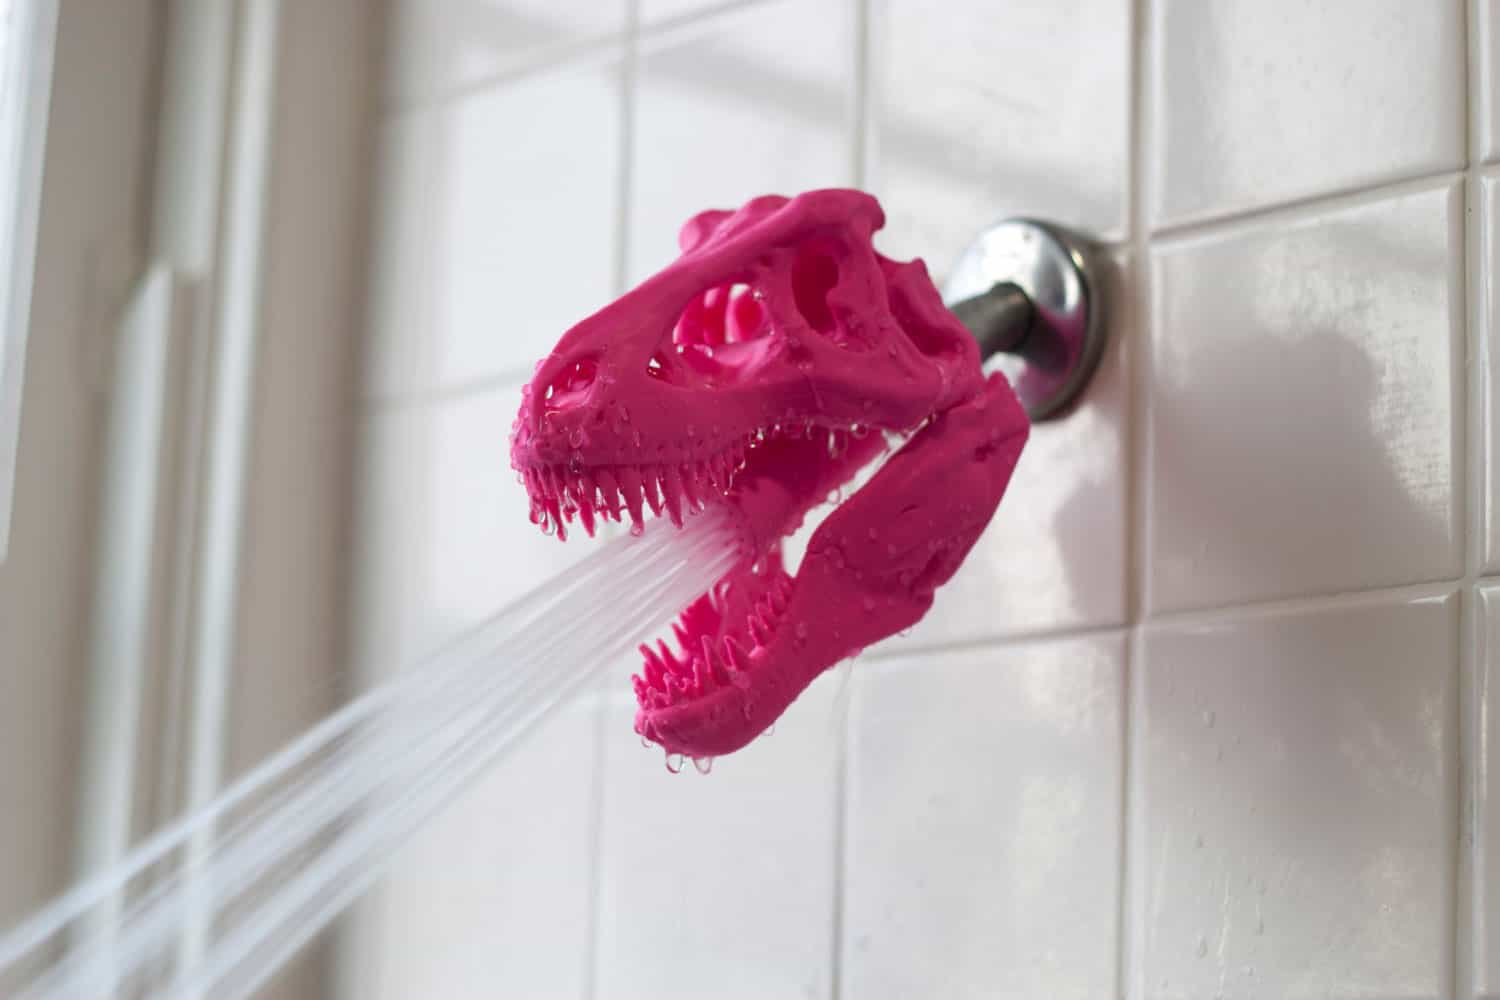 Pixel and Print 3D Printed Skull Shower Head Cool Fixture to Buy